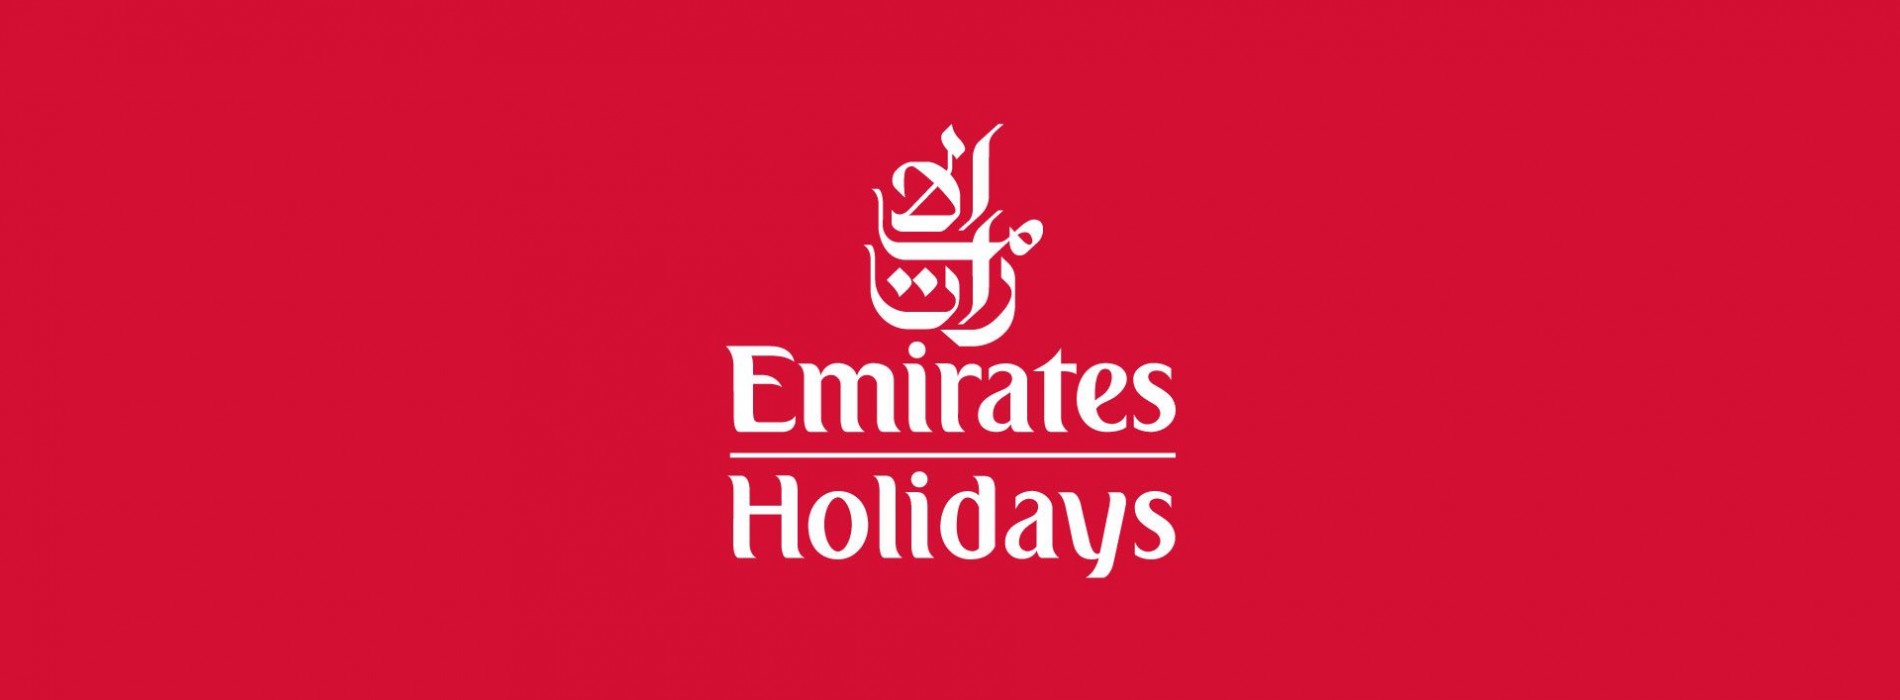 Emirates Holidays launches the Big Holiday Sale